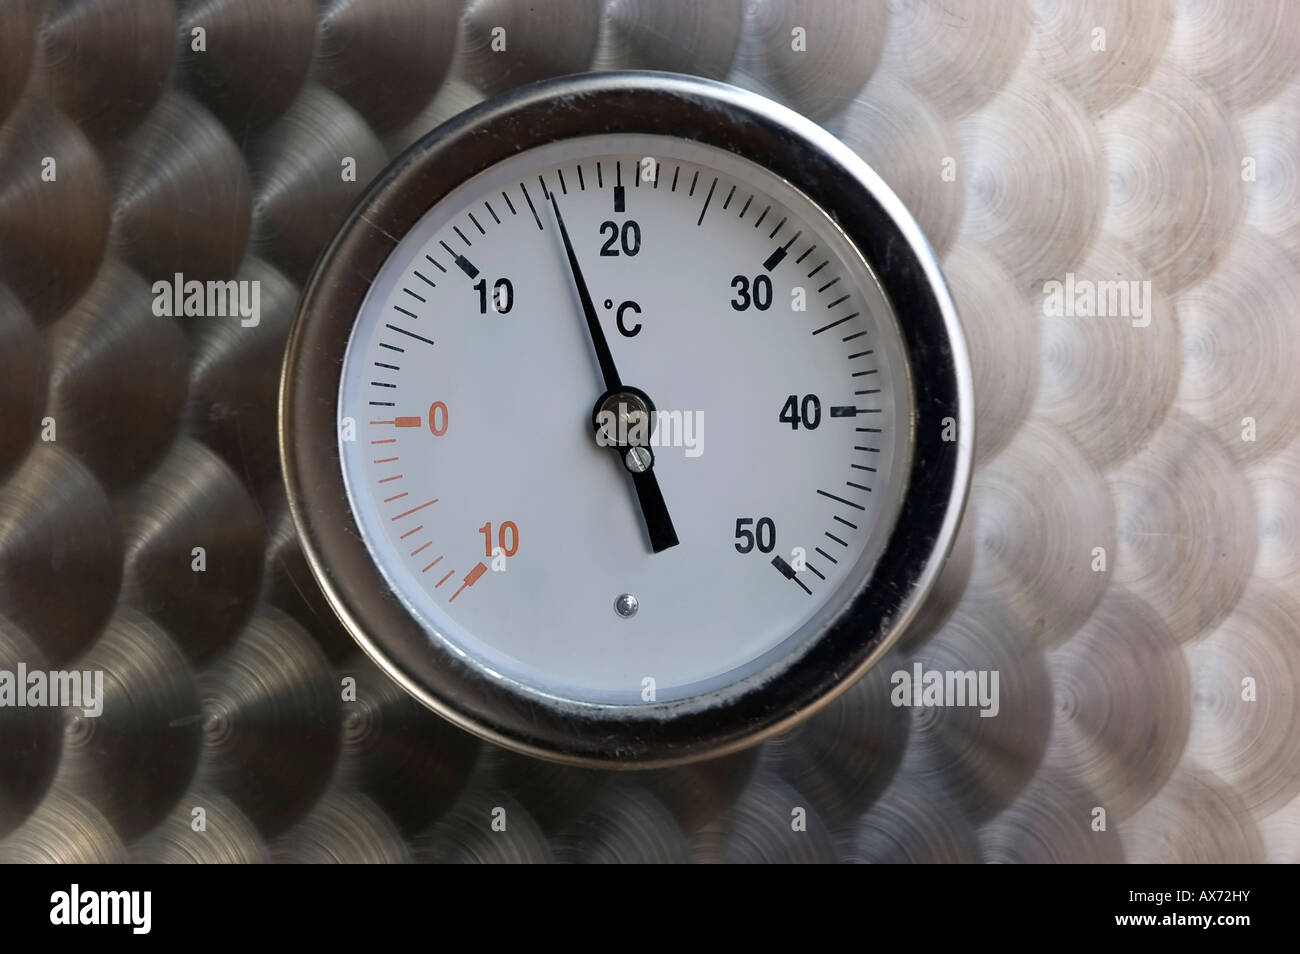 https://c8.alamy.com/comp/AX72HY/industrial-thermometer-in-a-steel-tank-for-wine-celsius-degree-AX72HY.jpg